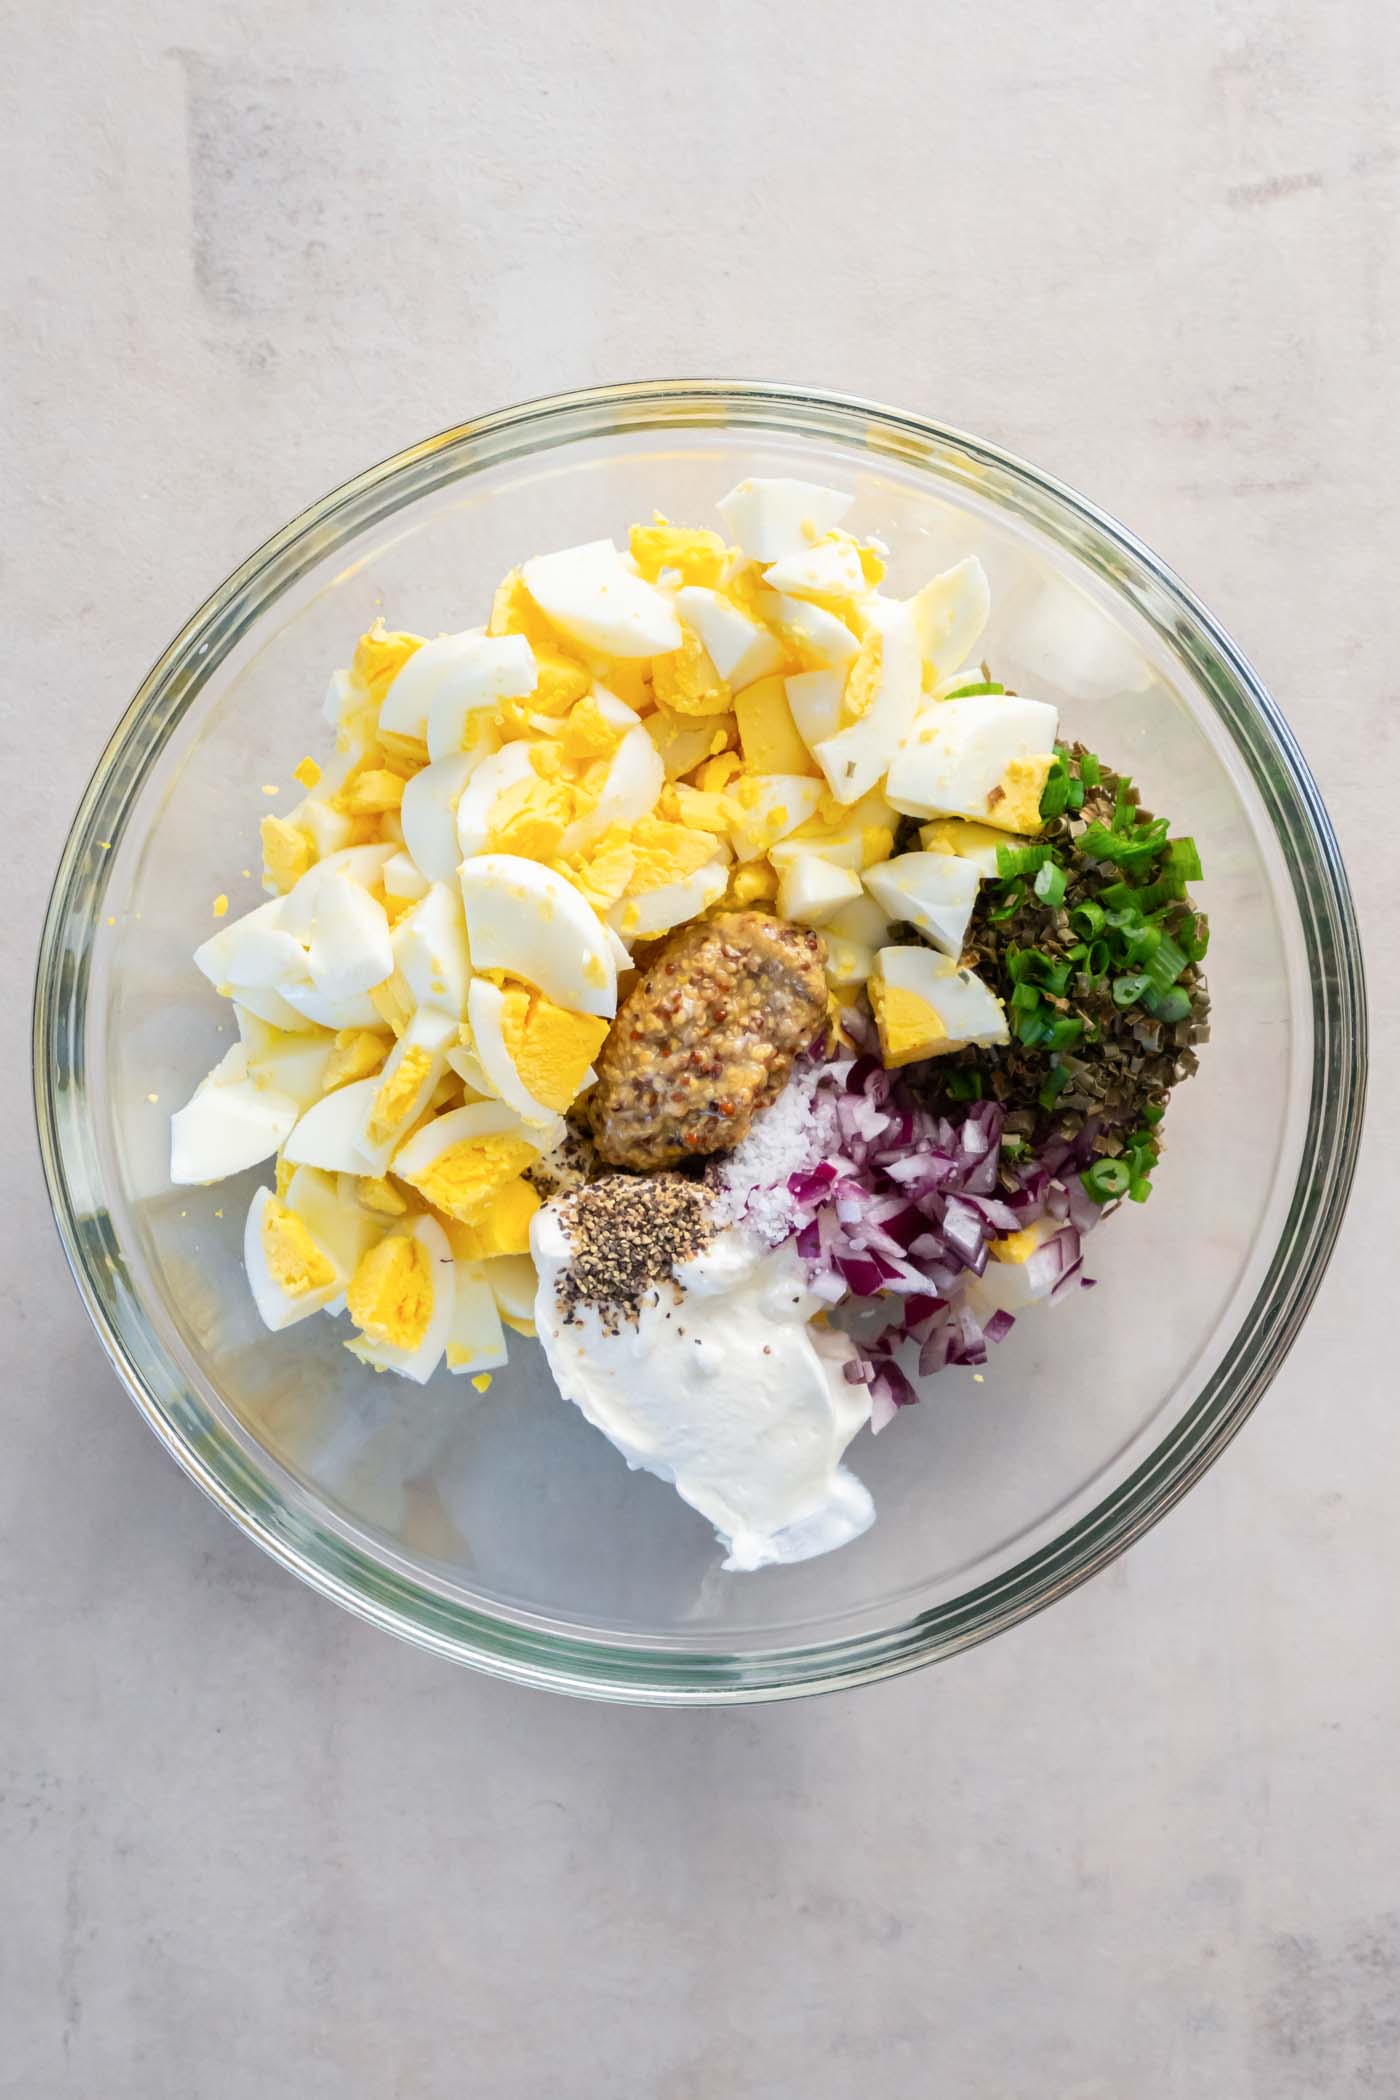 Egg salad ingredients in a mixing bowl.